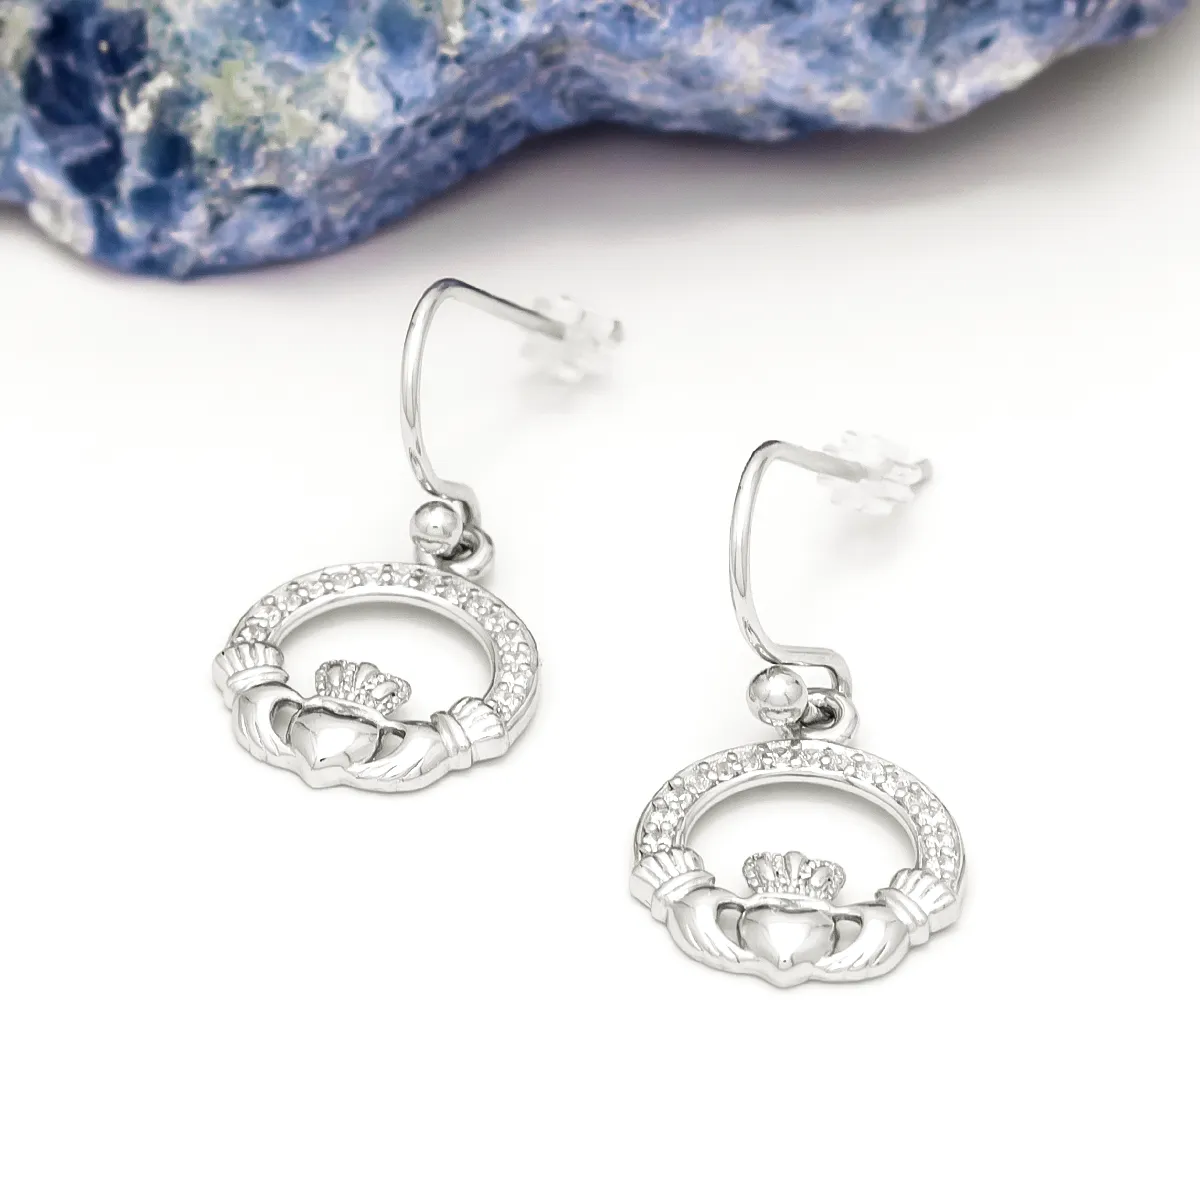 Silver Claddagh Earrings with Cubic Zirconia...